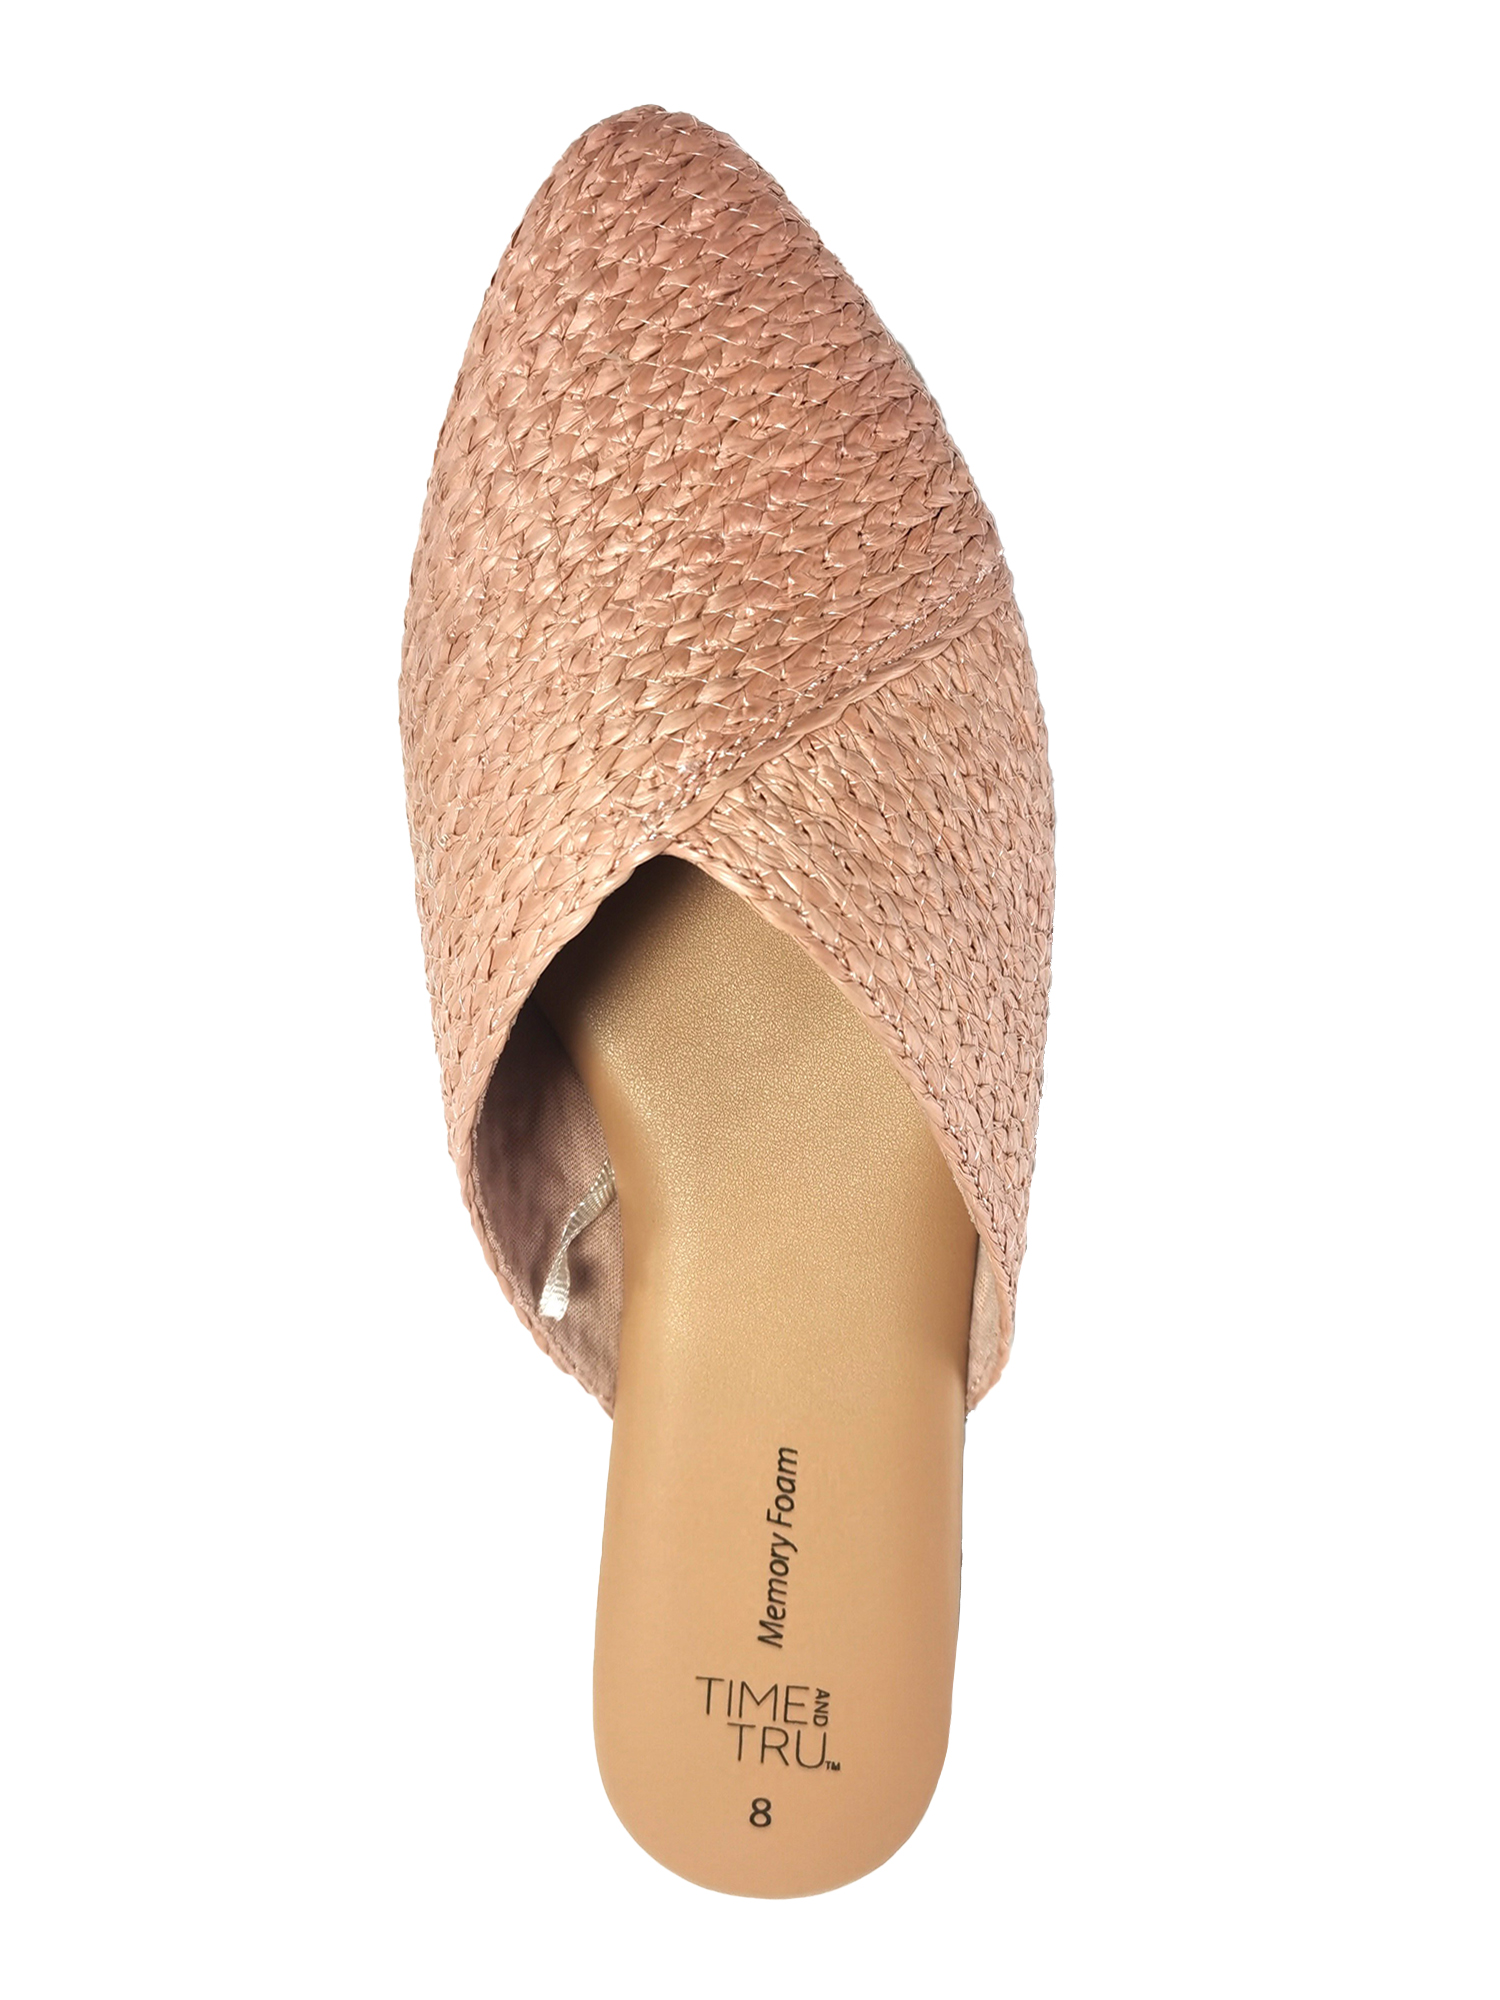 Time And Tru Women's Raffia Mule Shoes - image 5 of 6